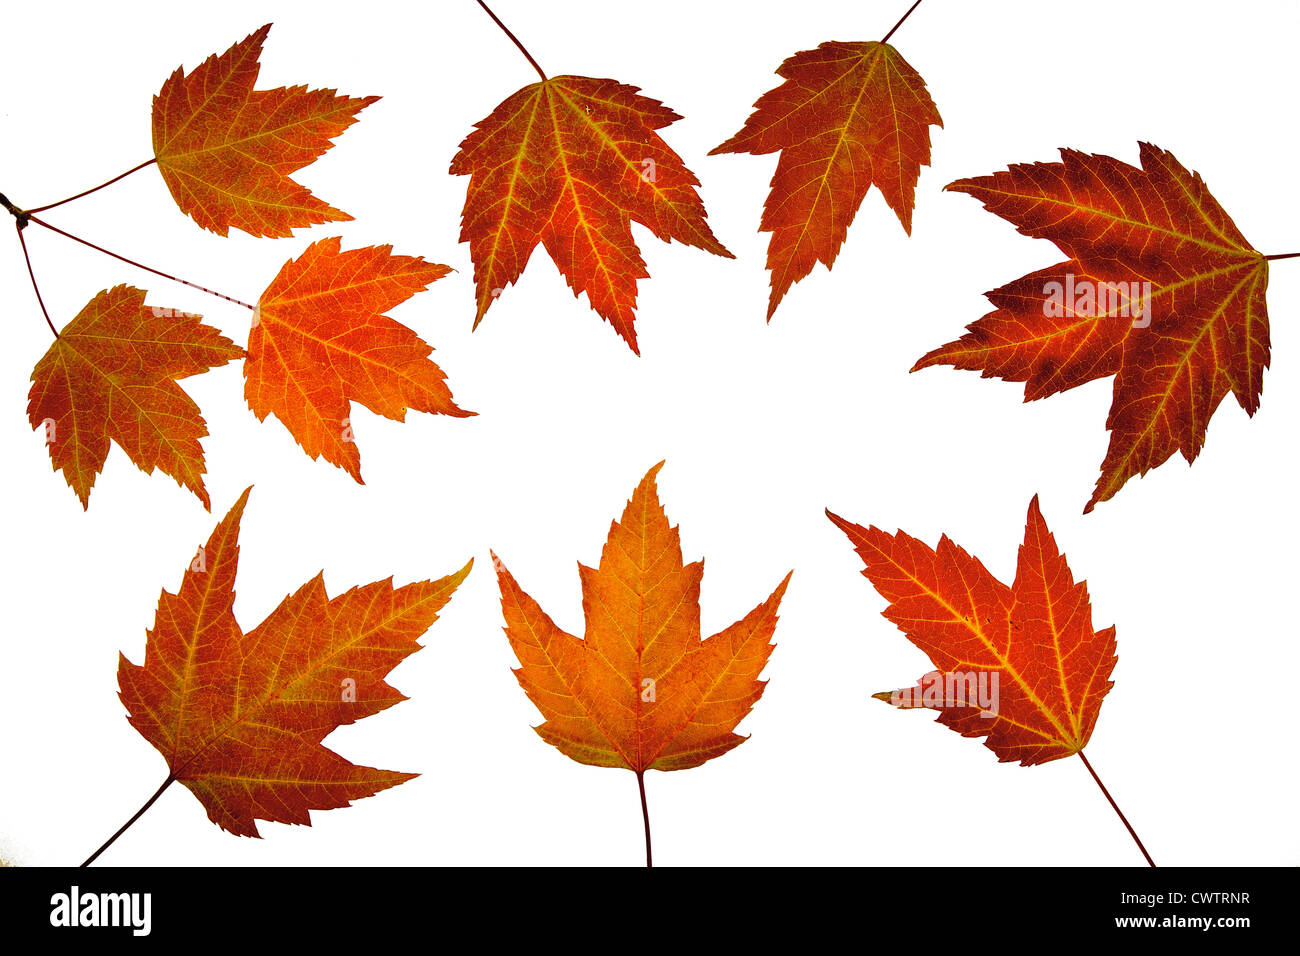 Red Maple Tree Leaves in Fall Isolated on White Background Stock Photo